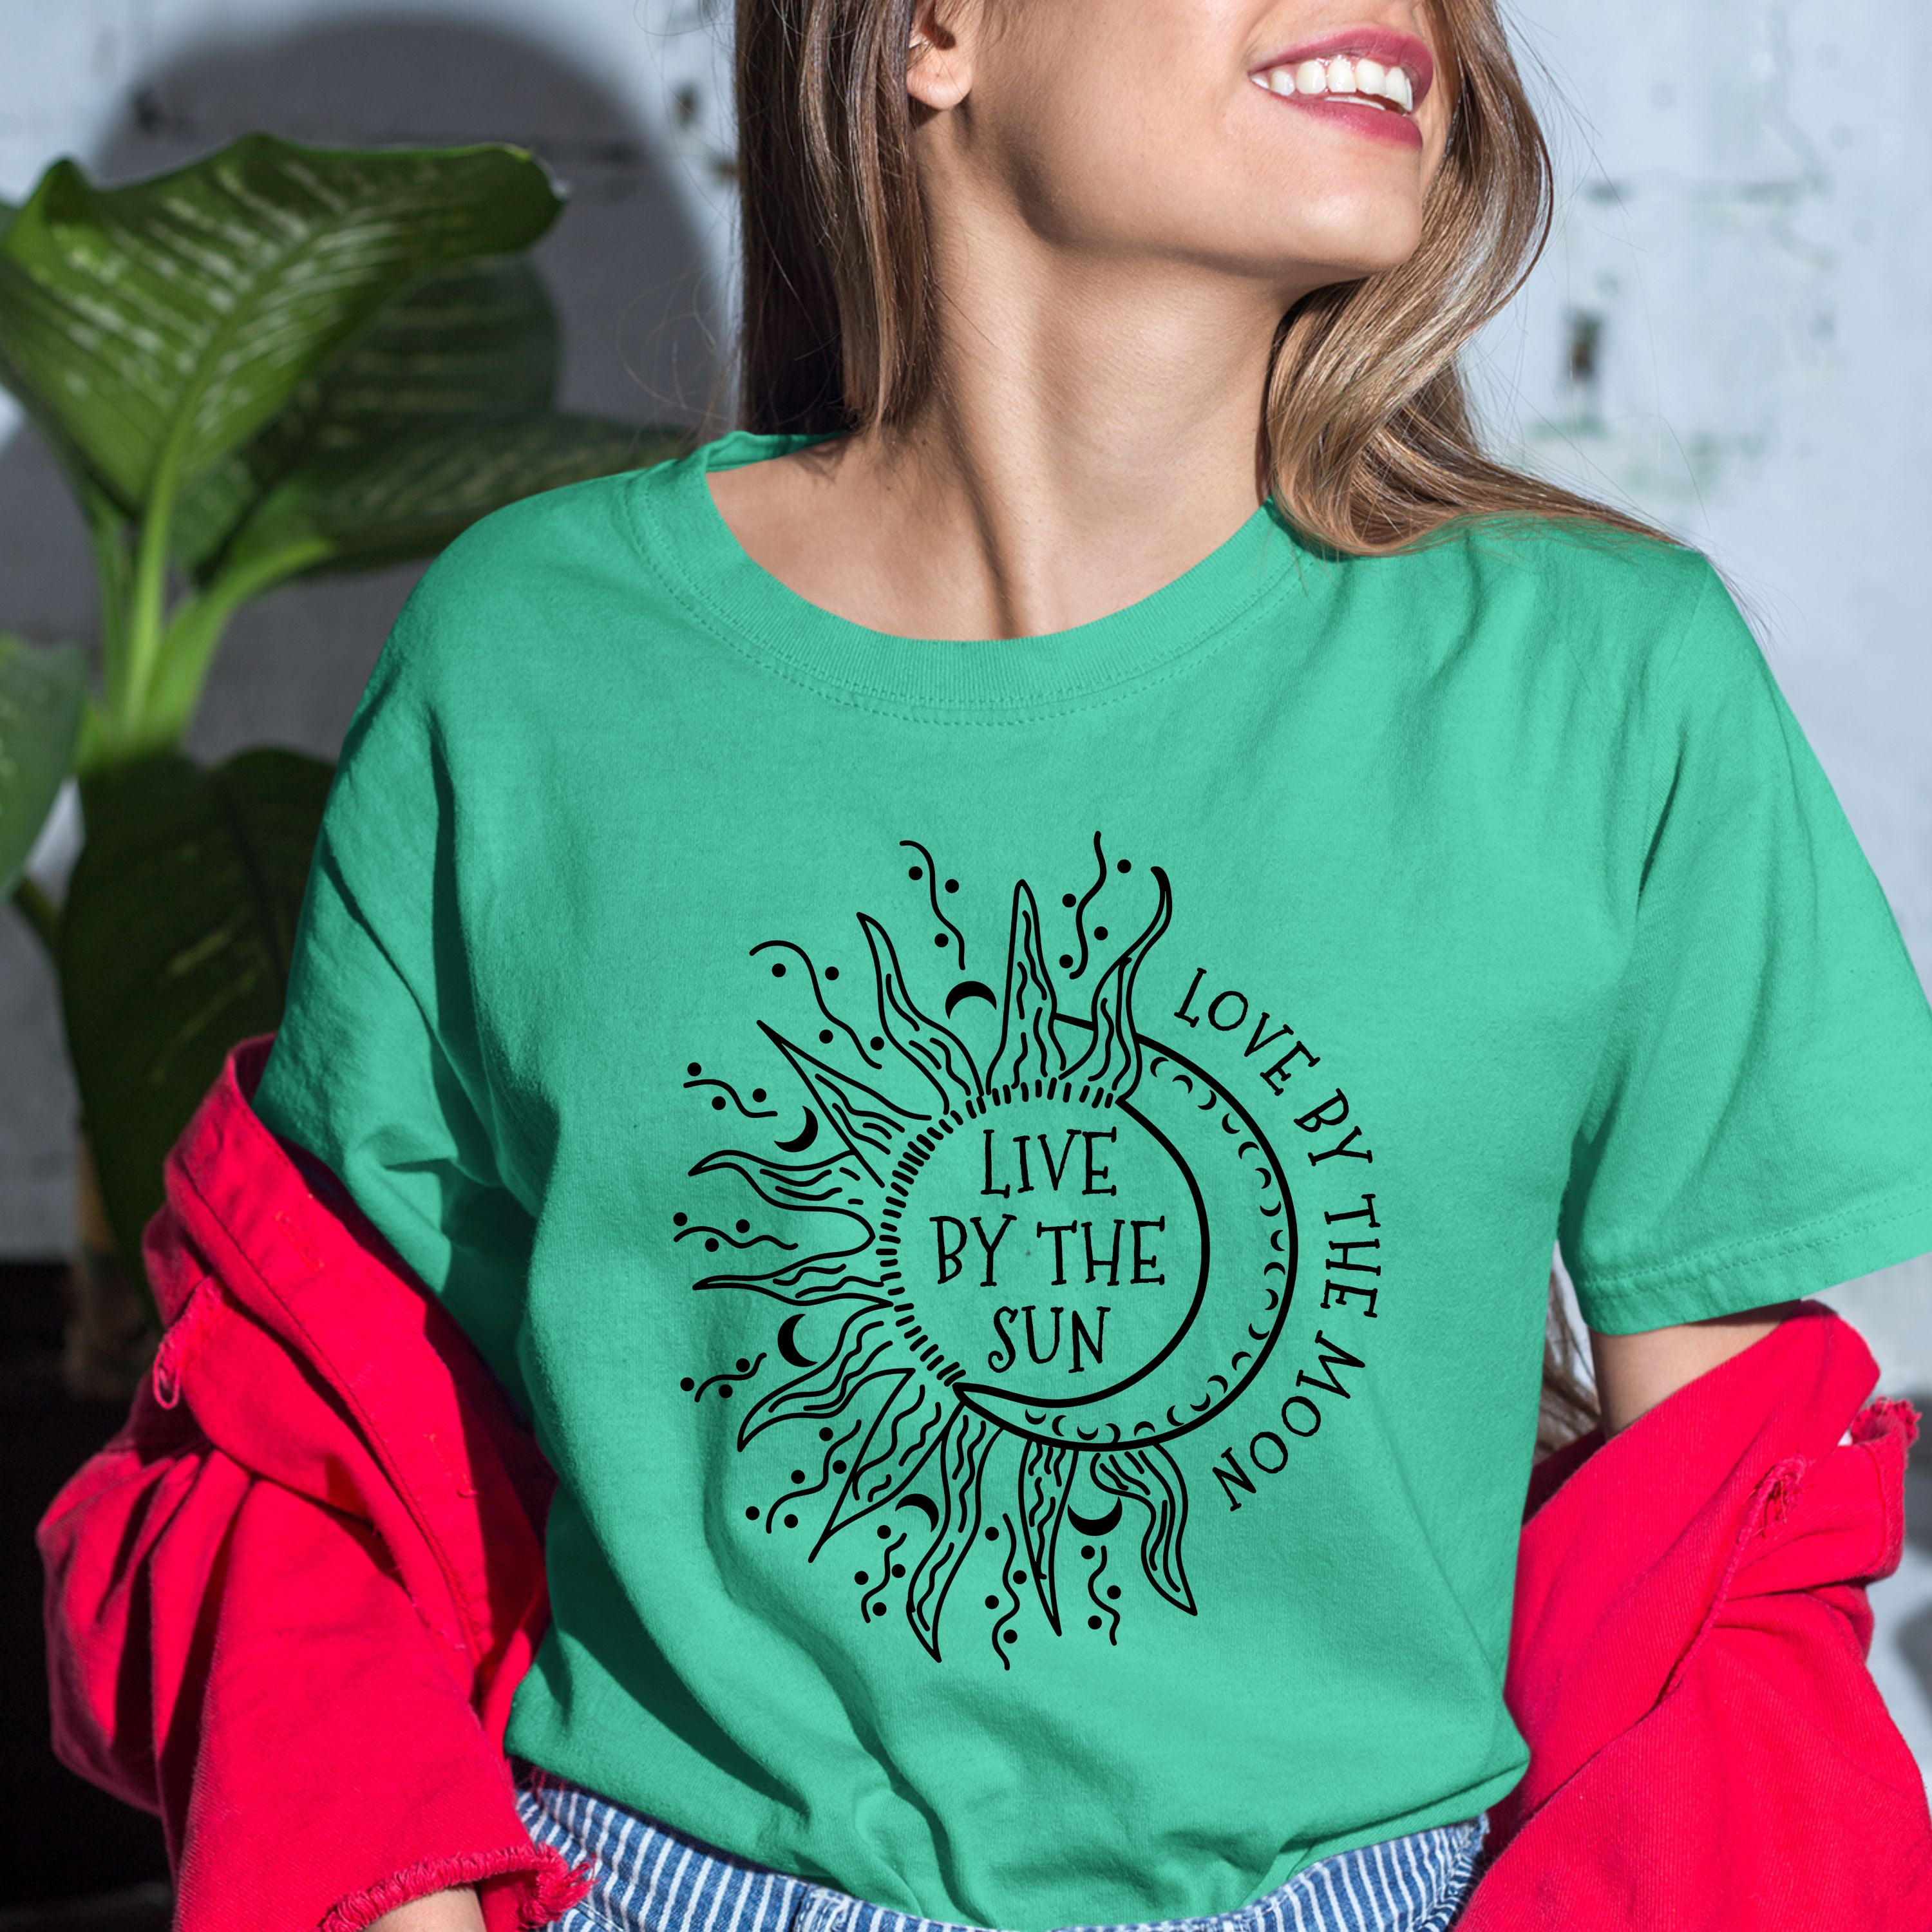 "LIVE BY THE SUN" BELLA CANVAS T-SHIRT